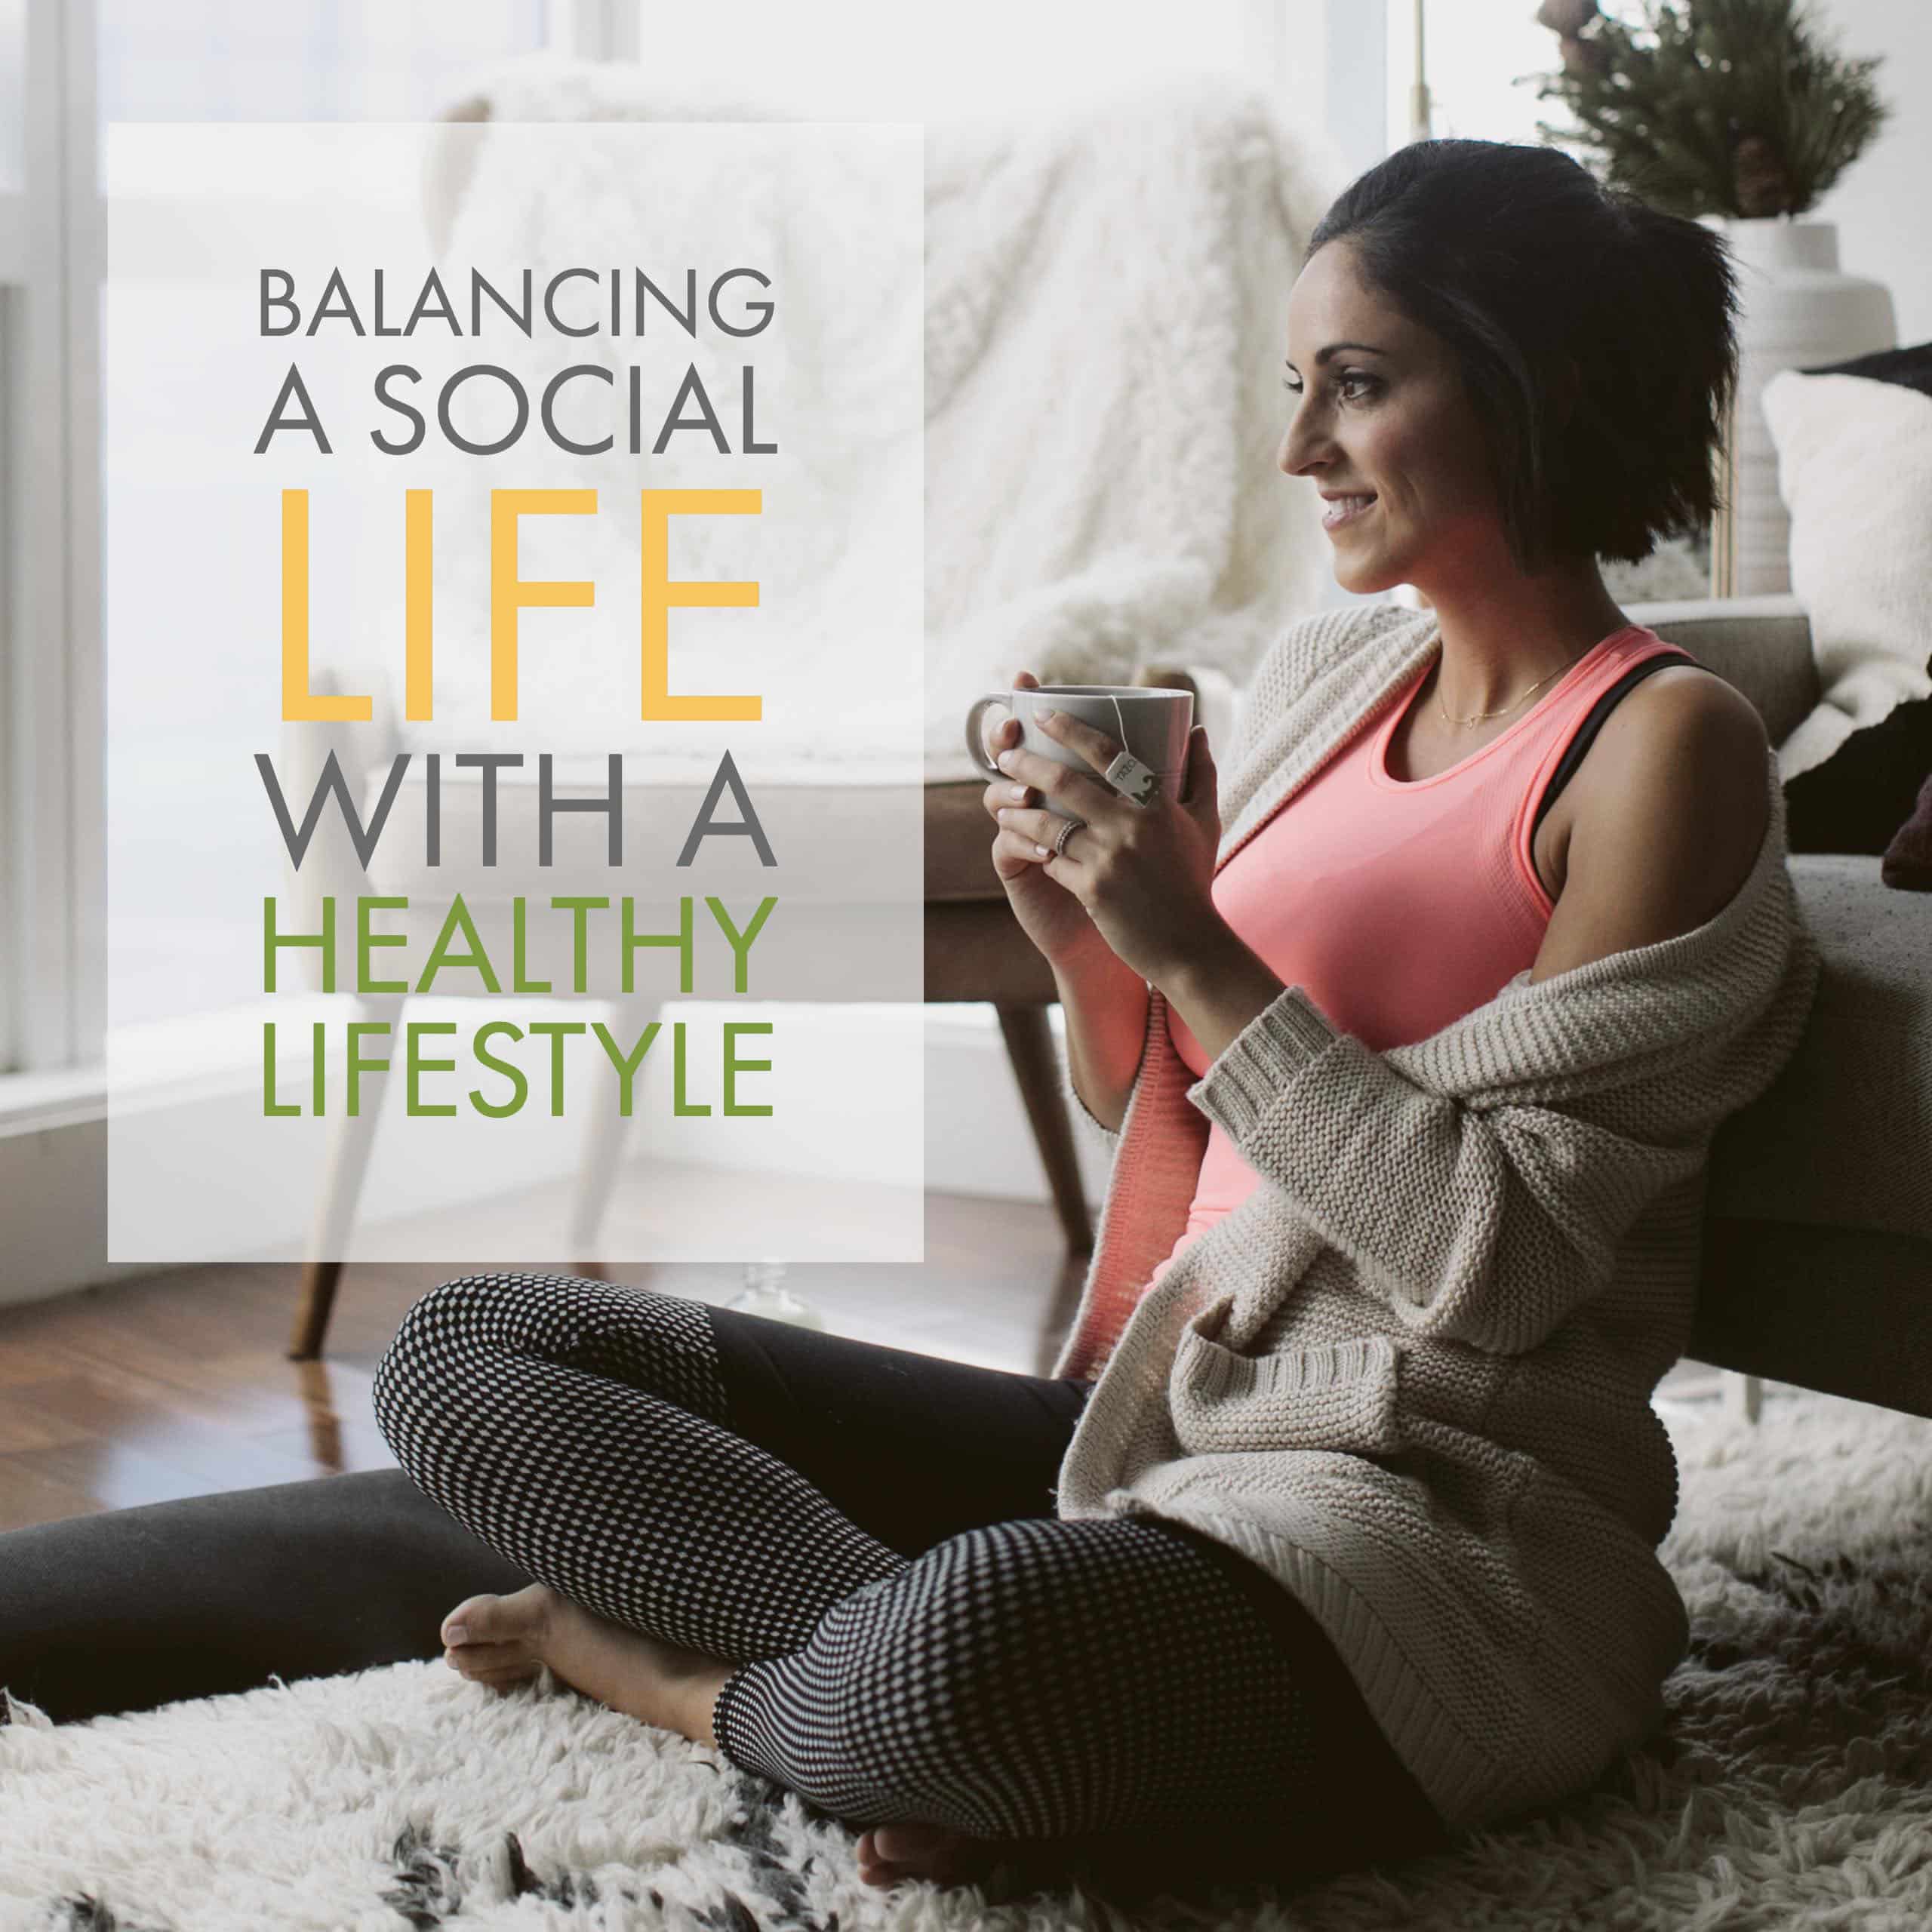 How to Balance a Social Life with A Healthy Lifestyle